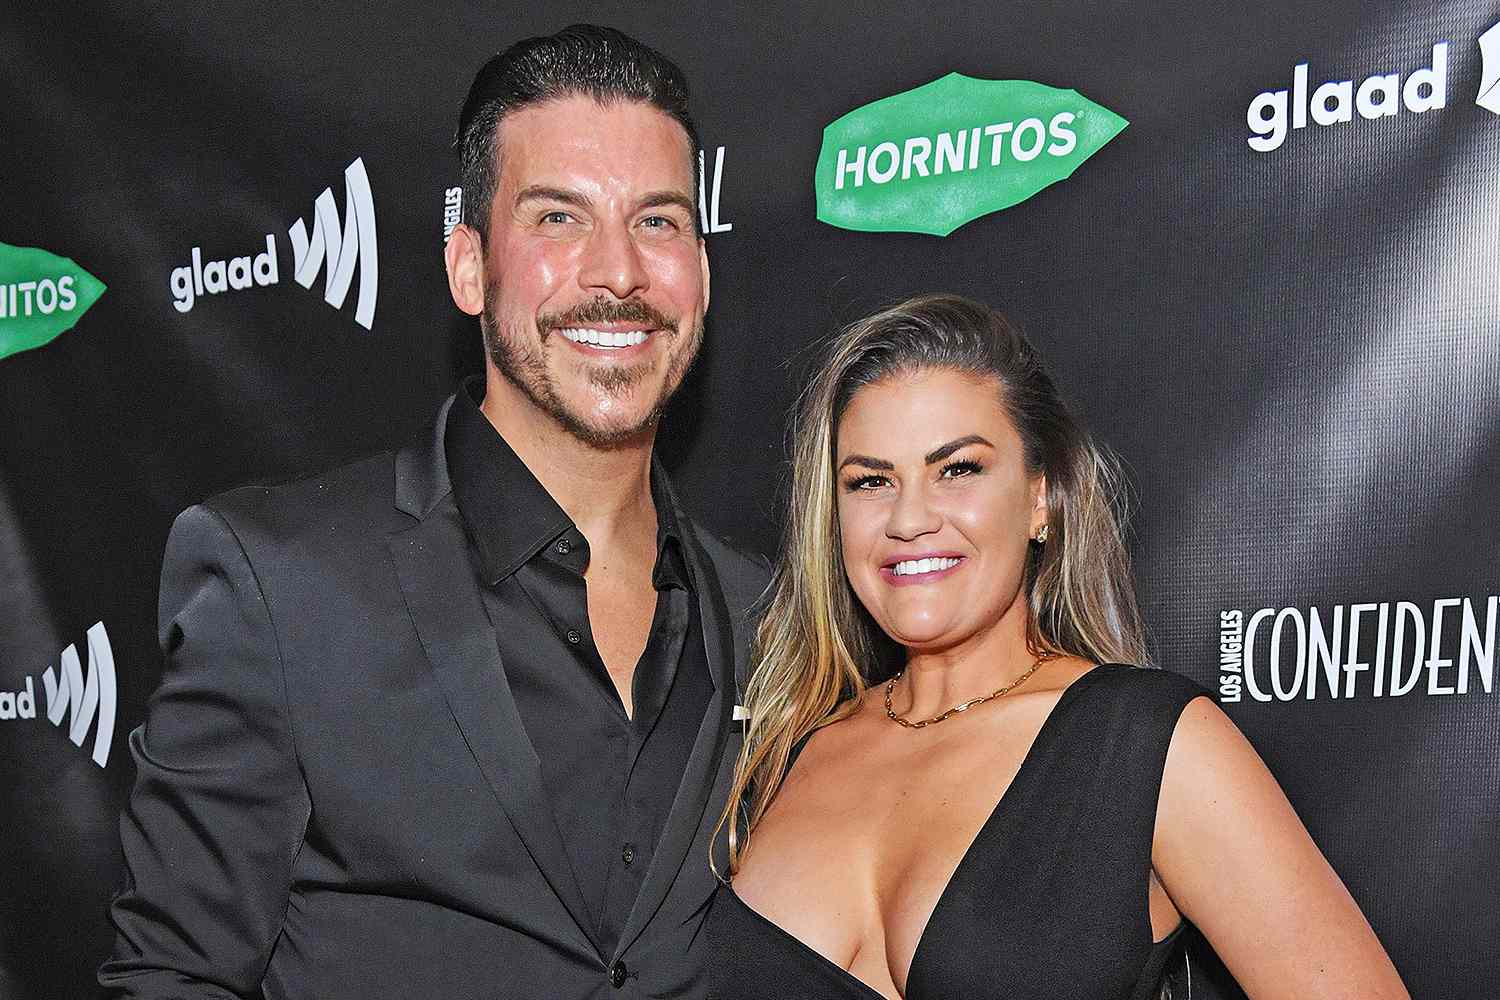 Jax Taylor says he and wife Brittany don't believe in divorce.